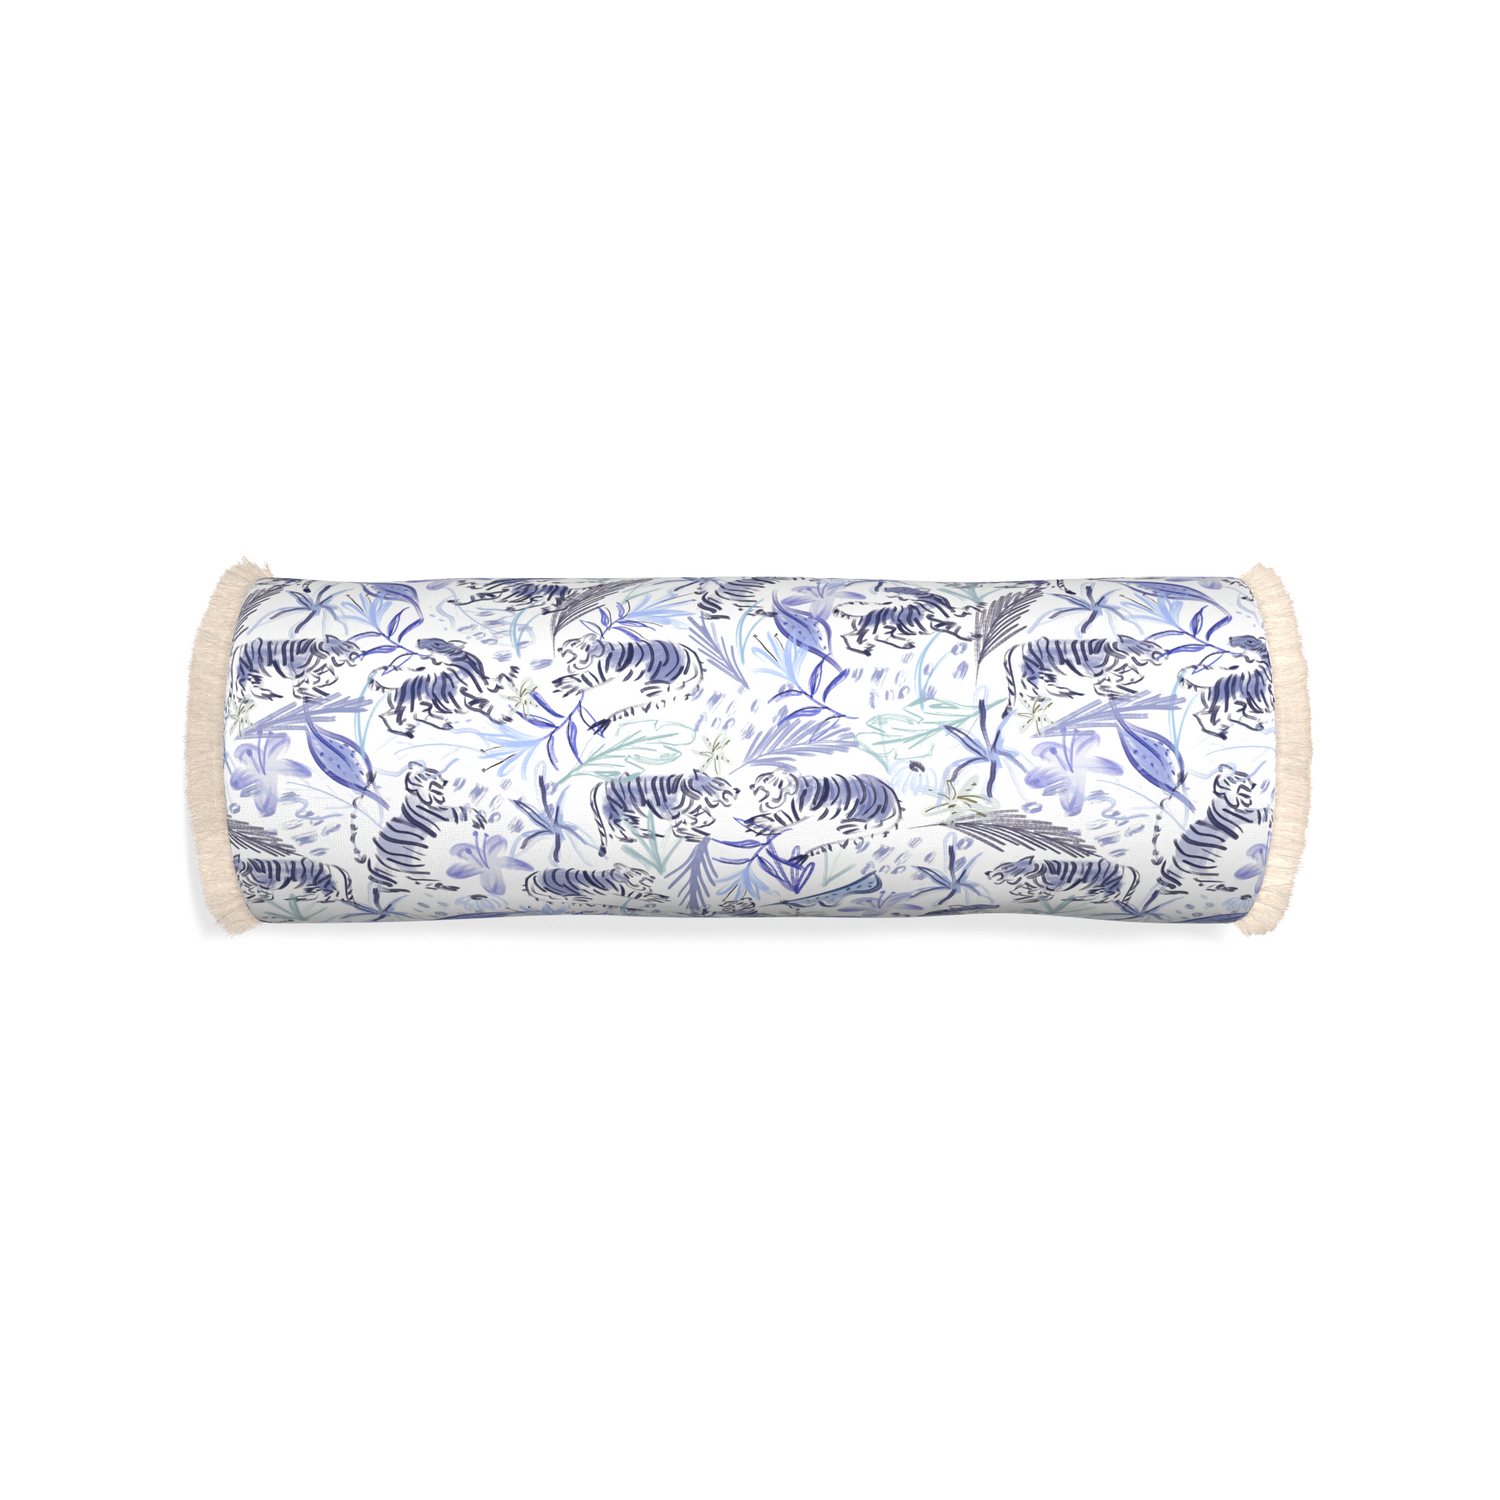 Bolster frida blue custom blue with intricate tiger designpillow with cream fringe on white background